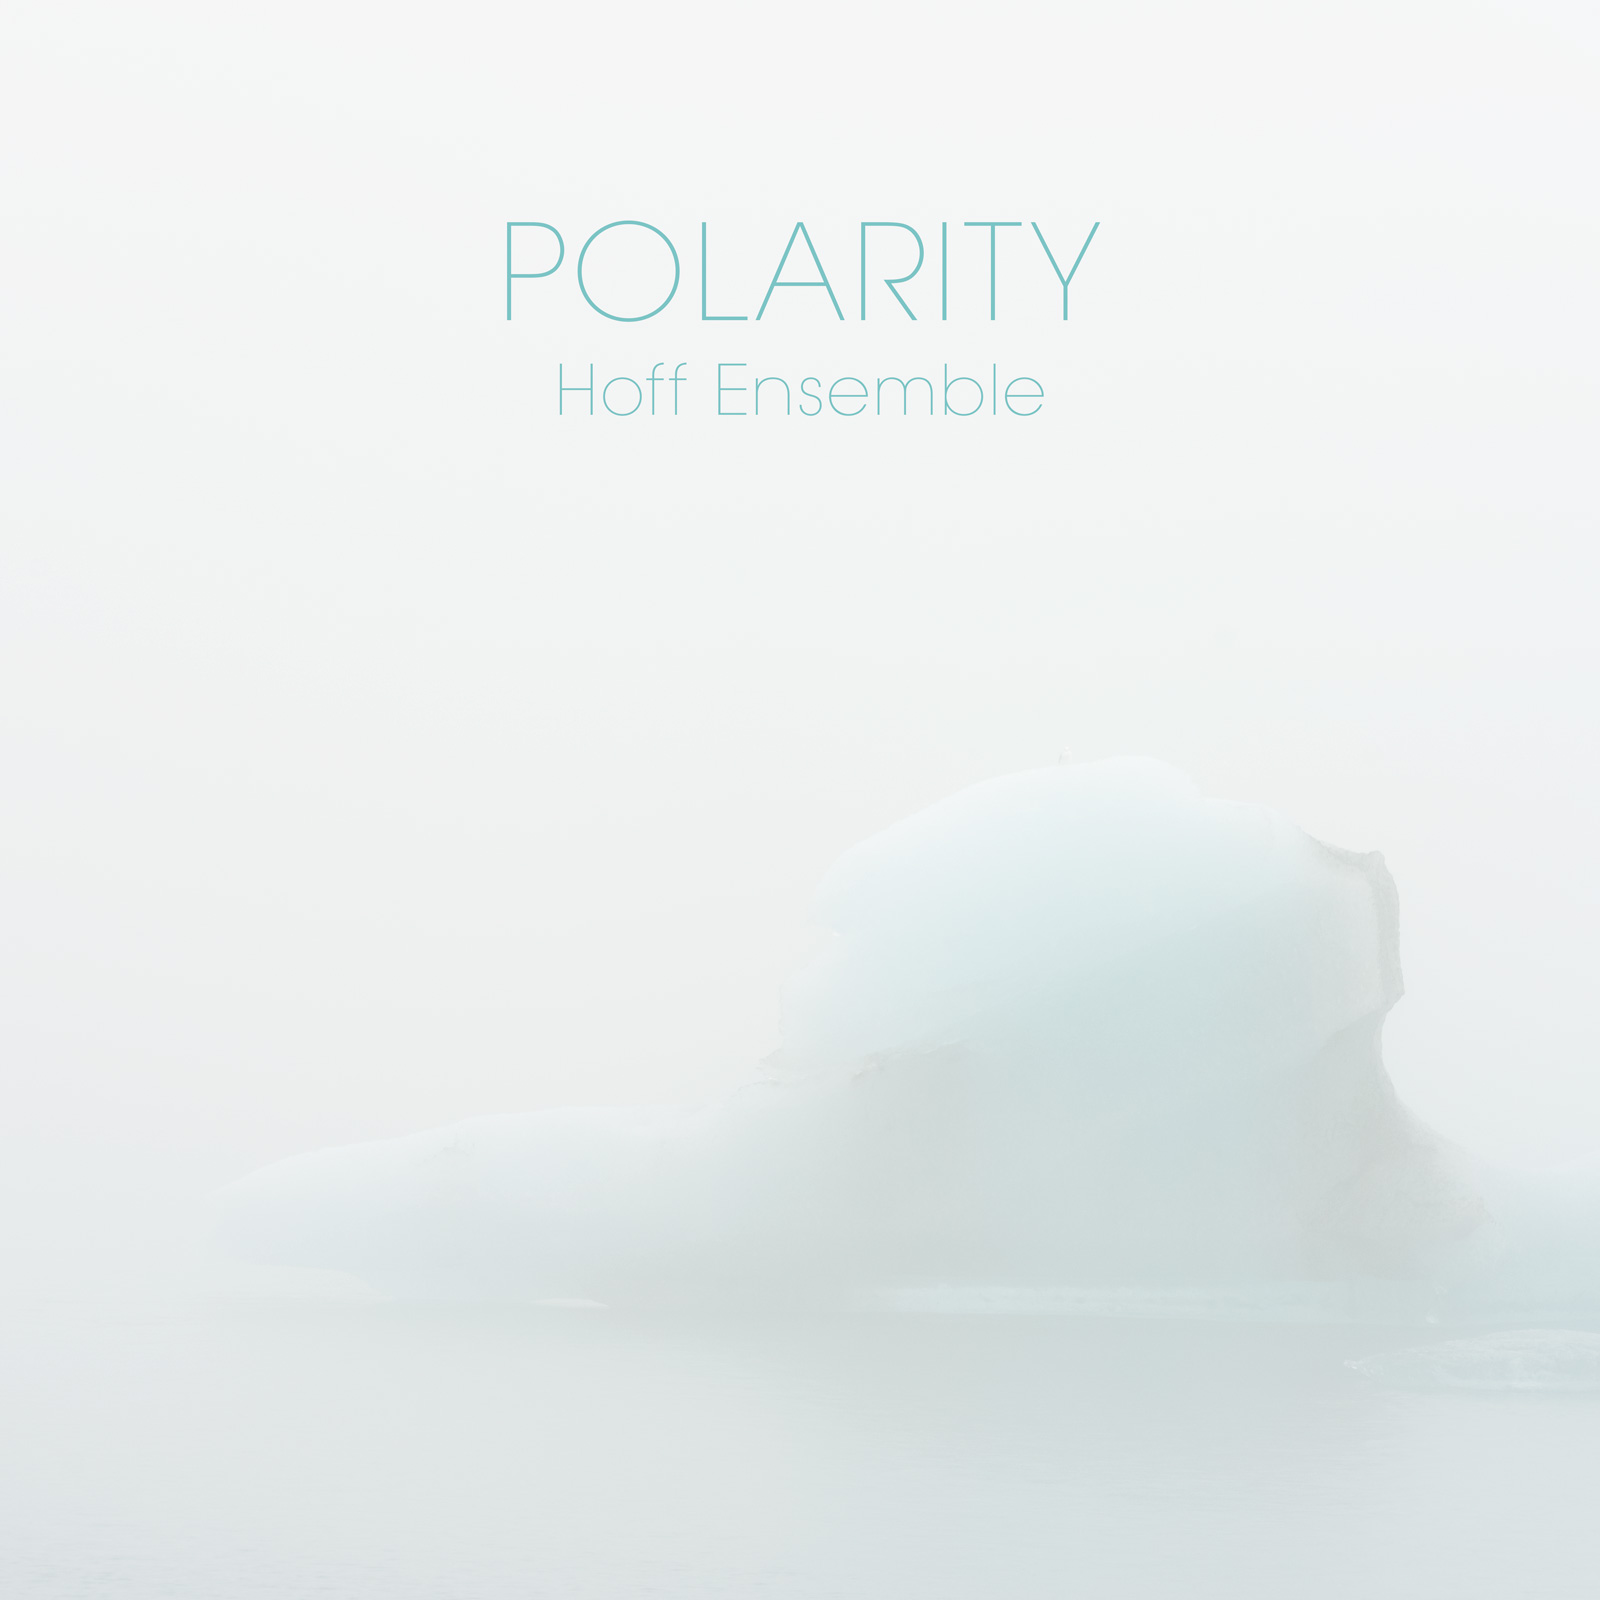 Hoff Ensemble – Polarity: An Acoustic Jazz Project (2018) MCH SACD ISO + DSF DSD64 + Hi-Res FLAC